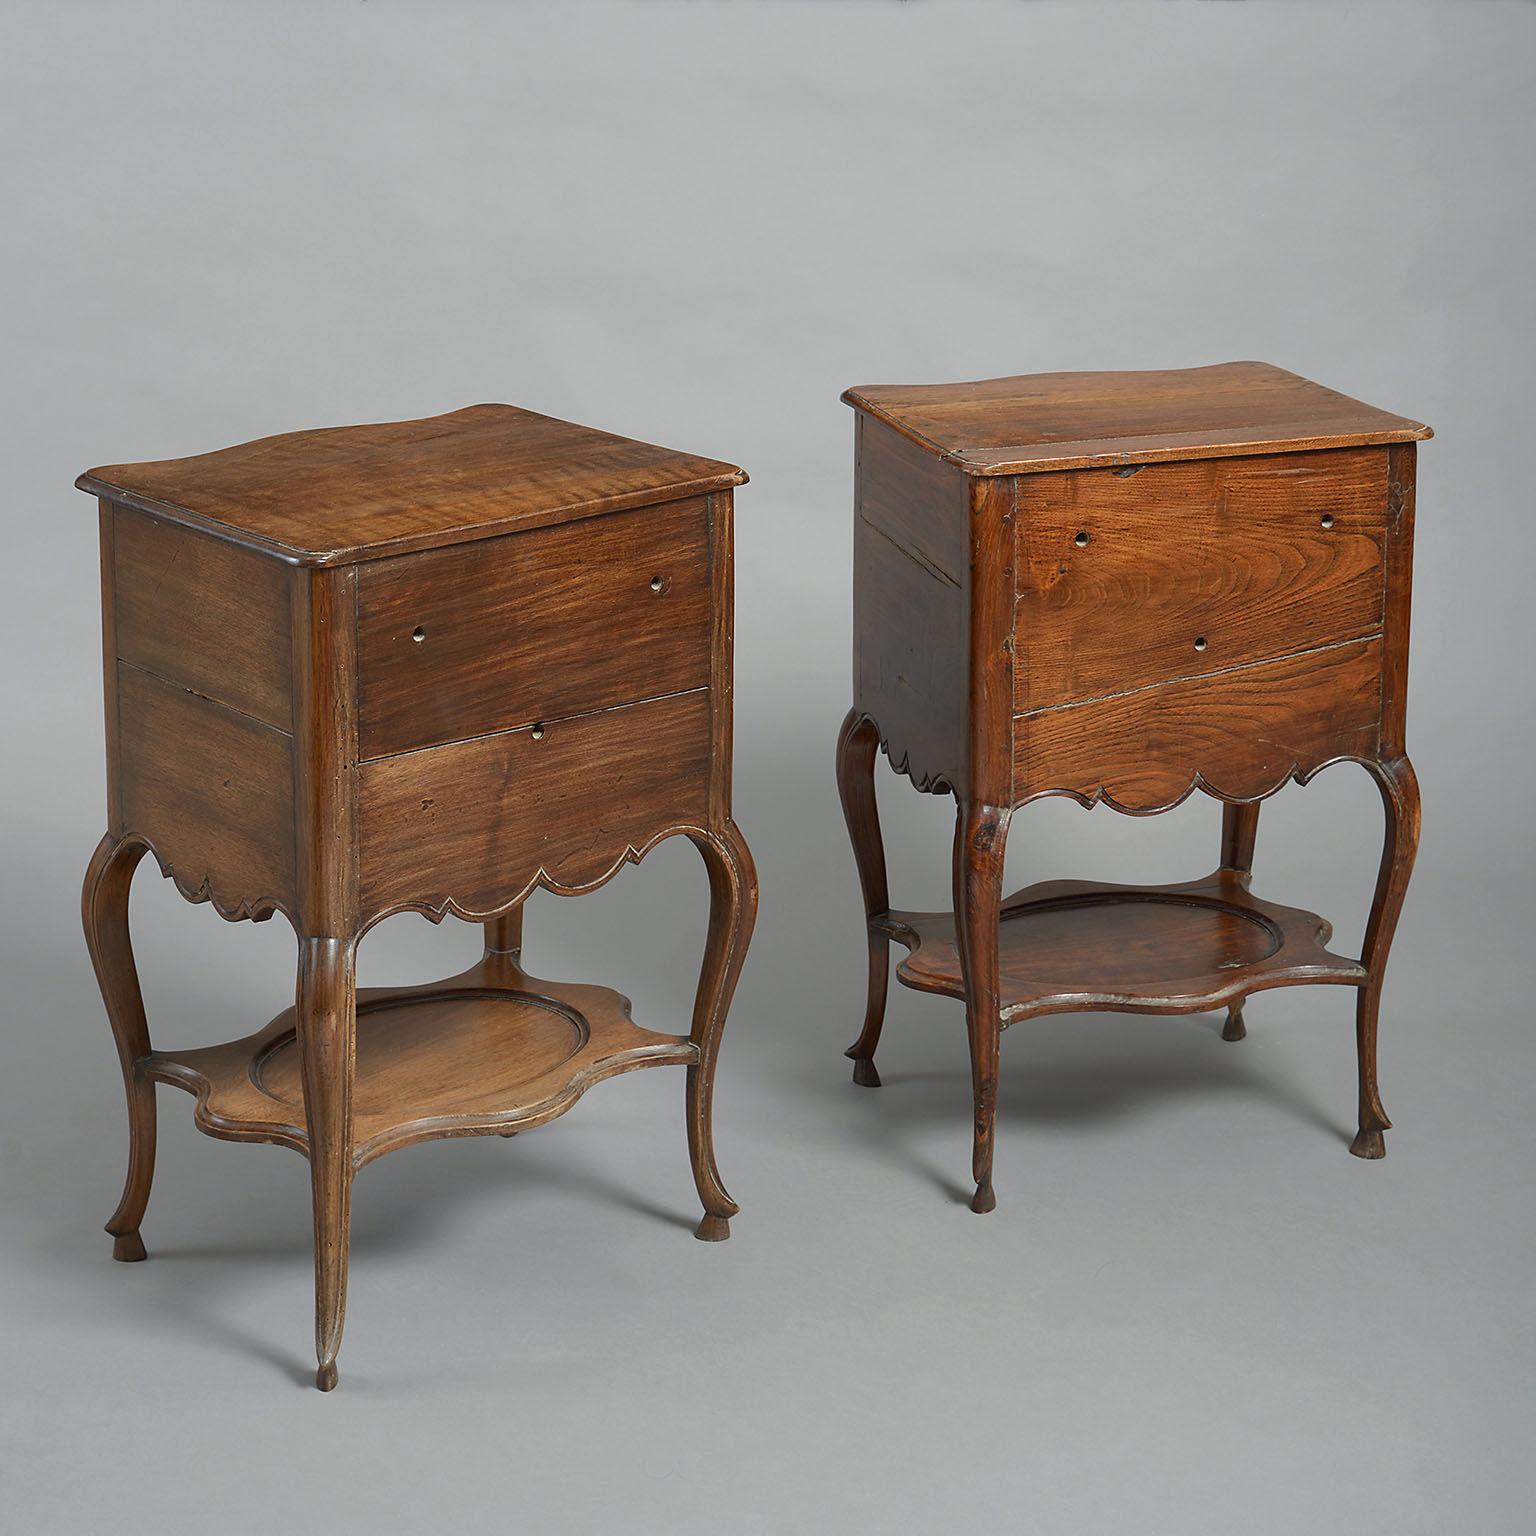 Mid-18th Century Pair of 18th Century Walnut and Chestnut Bedside Tables